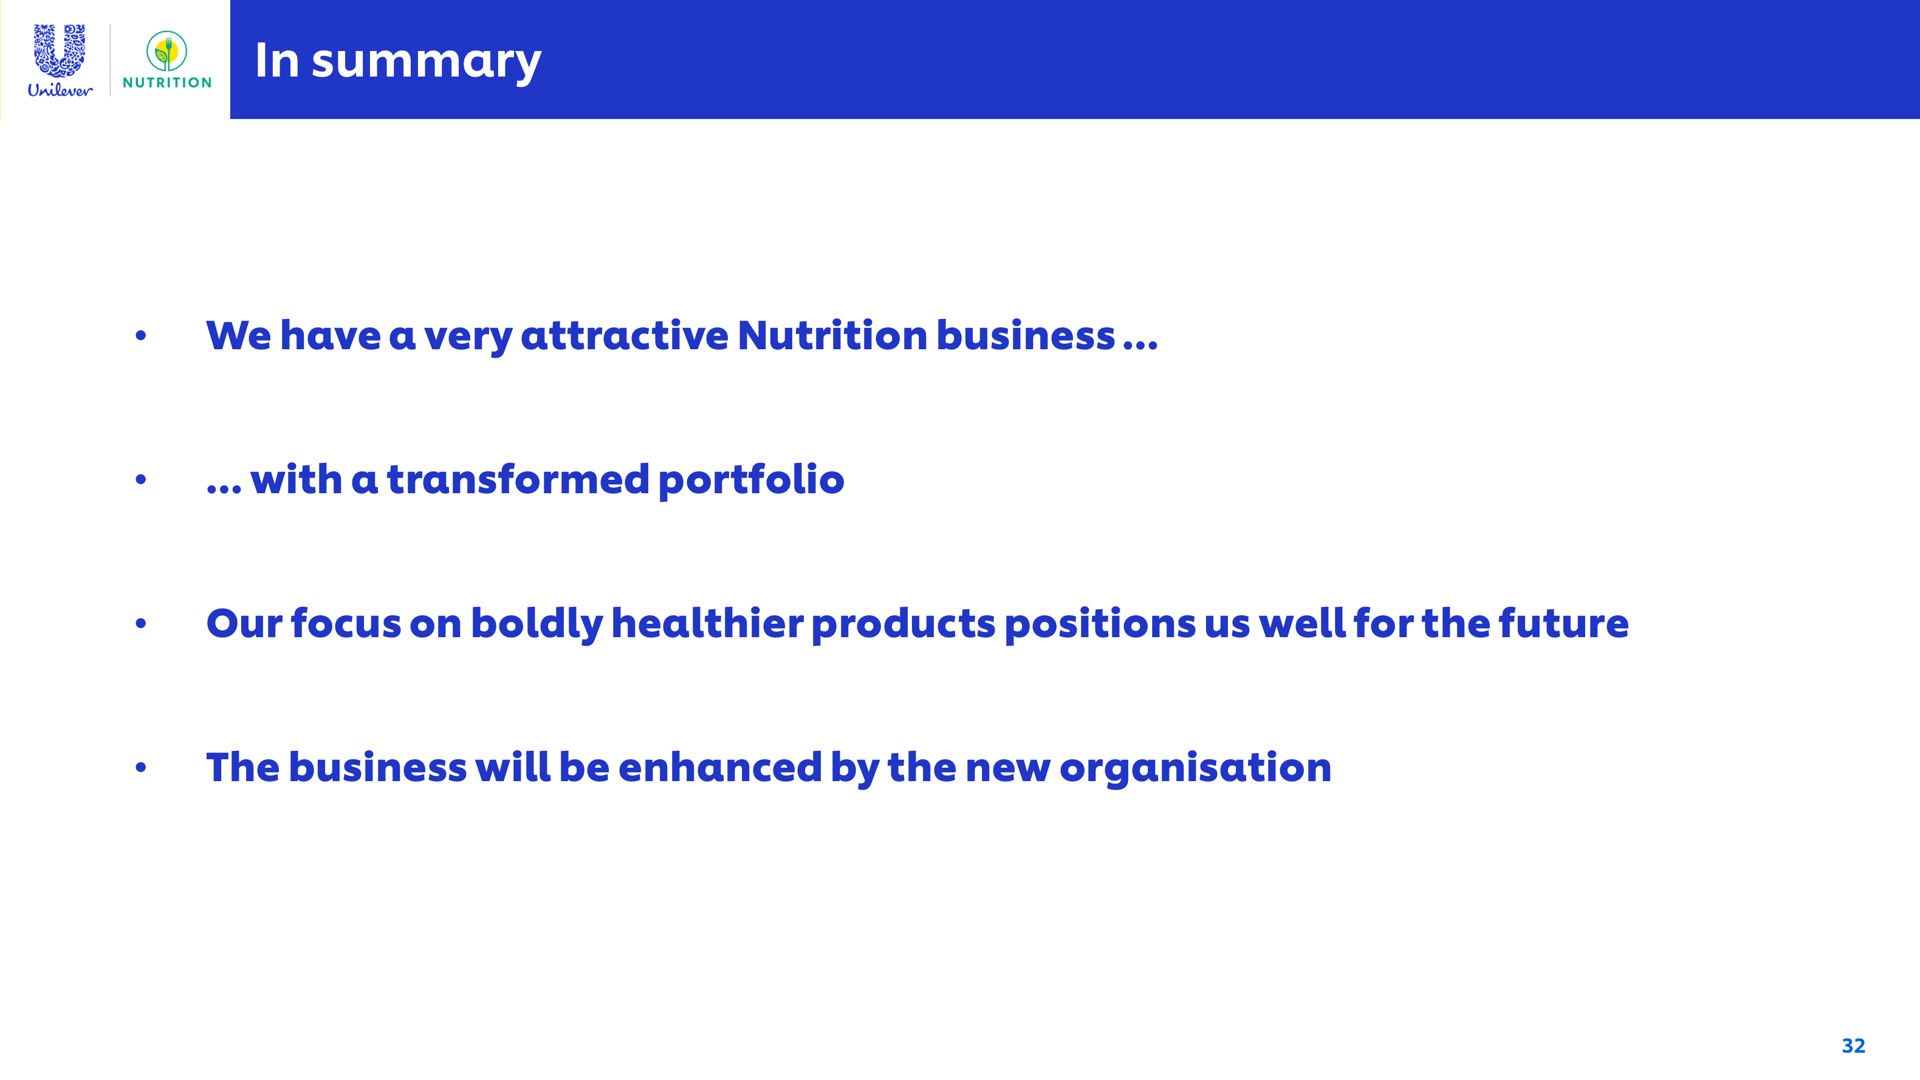 in summary attractive nutrition business with a transformed portfolio the business will be enhanced by the new | Unilever